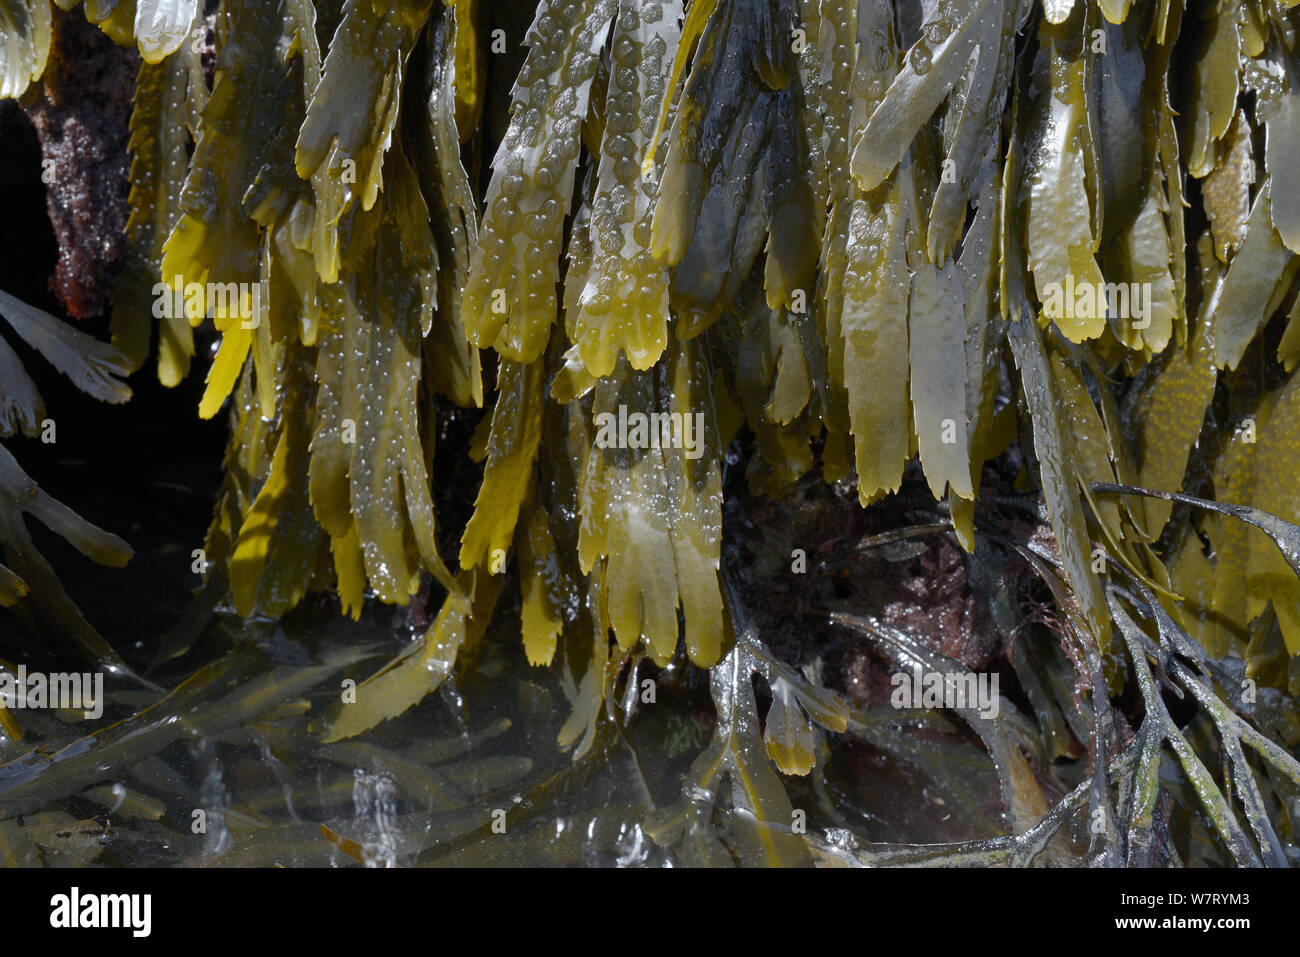 Toothed wrack (Fucus serratus) on rocks exposed at low tide and submerged in a rockpool, Lyme Regis, Dorset, UK, May. Stock Photo